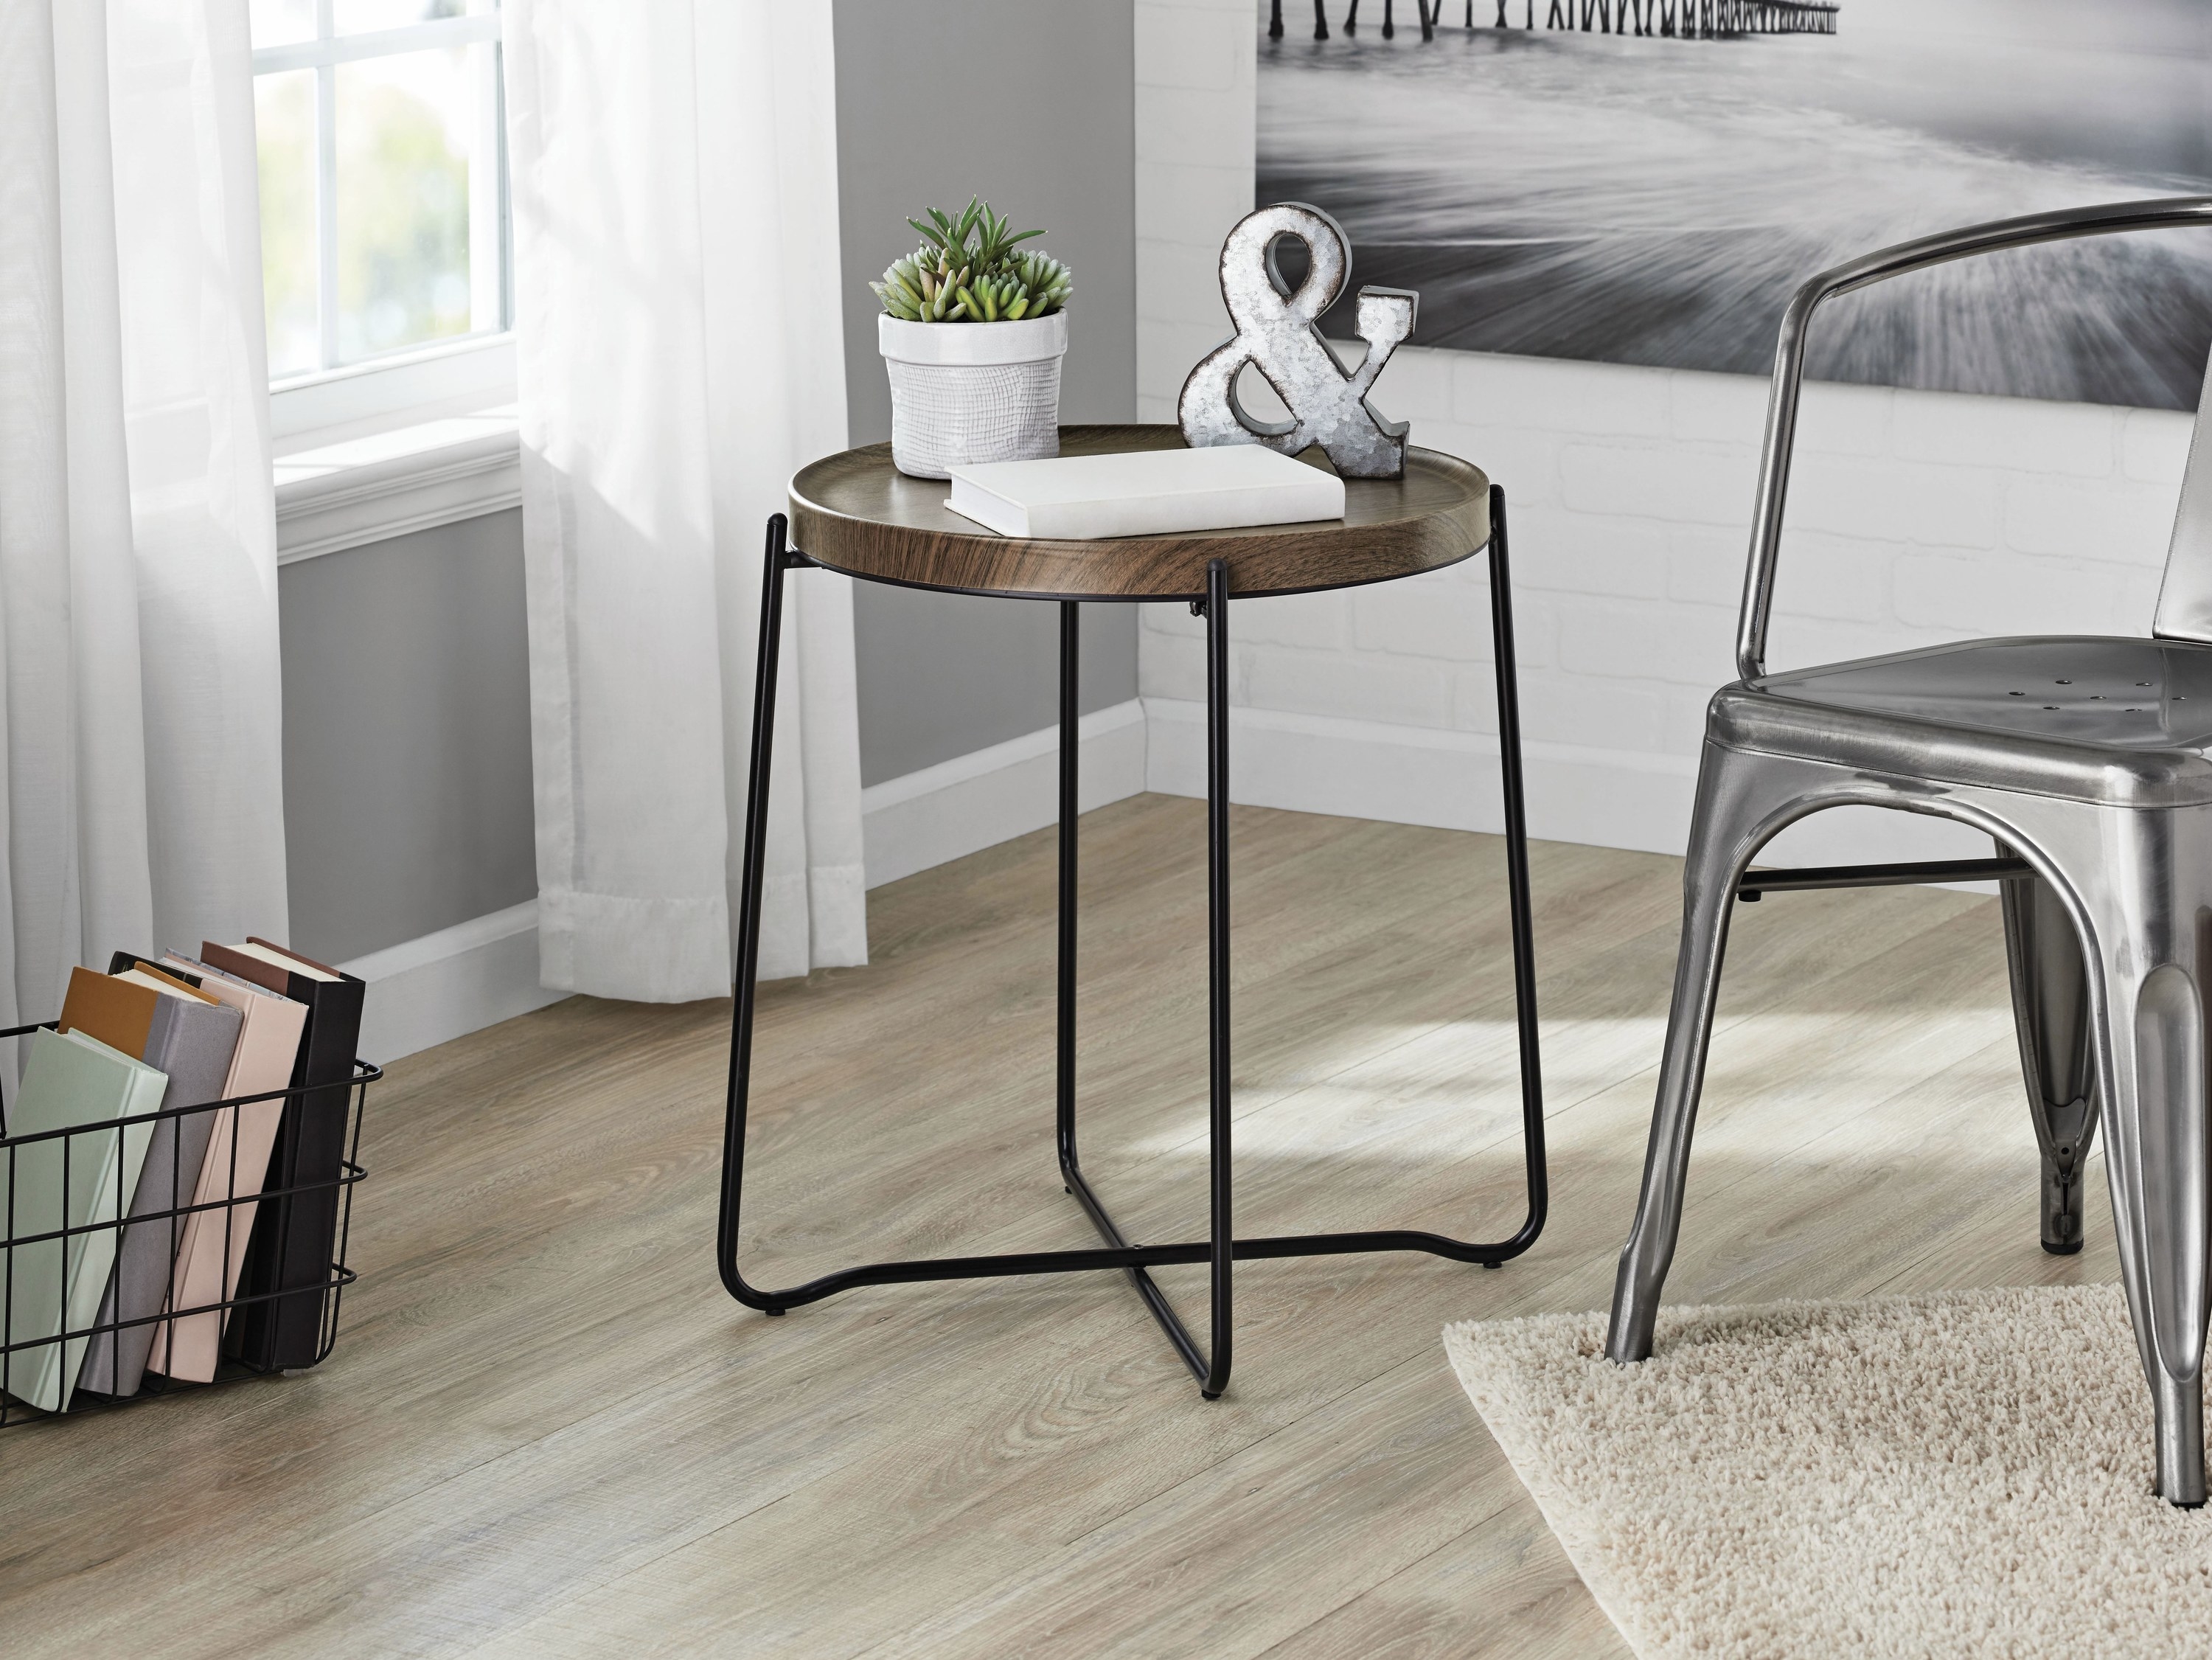 An image of the metal and wood side table inside a bedroom area